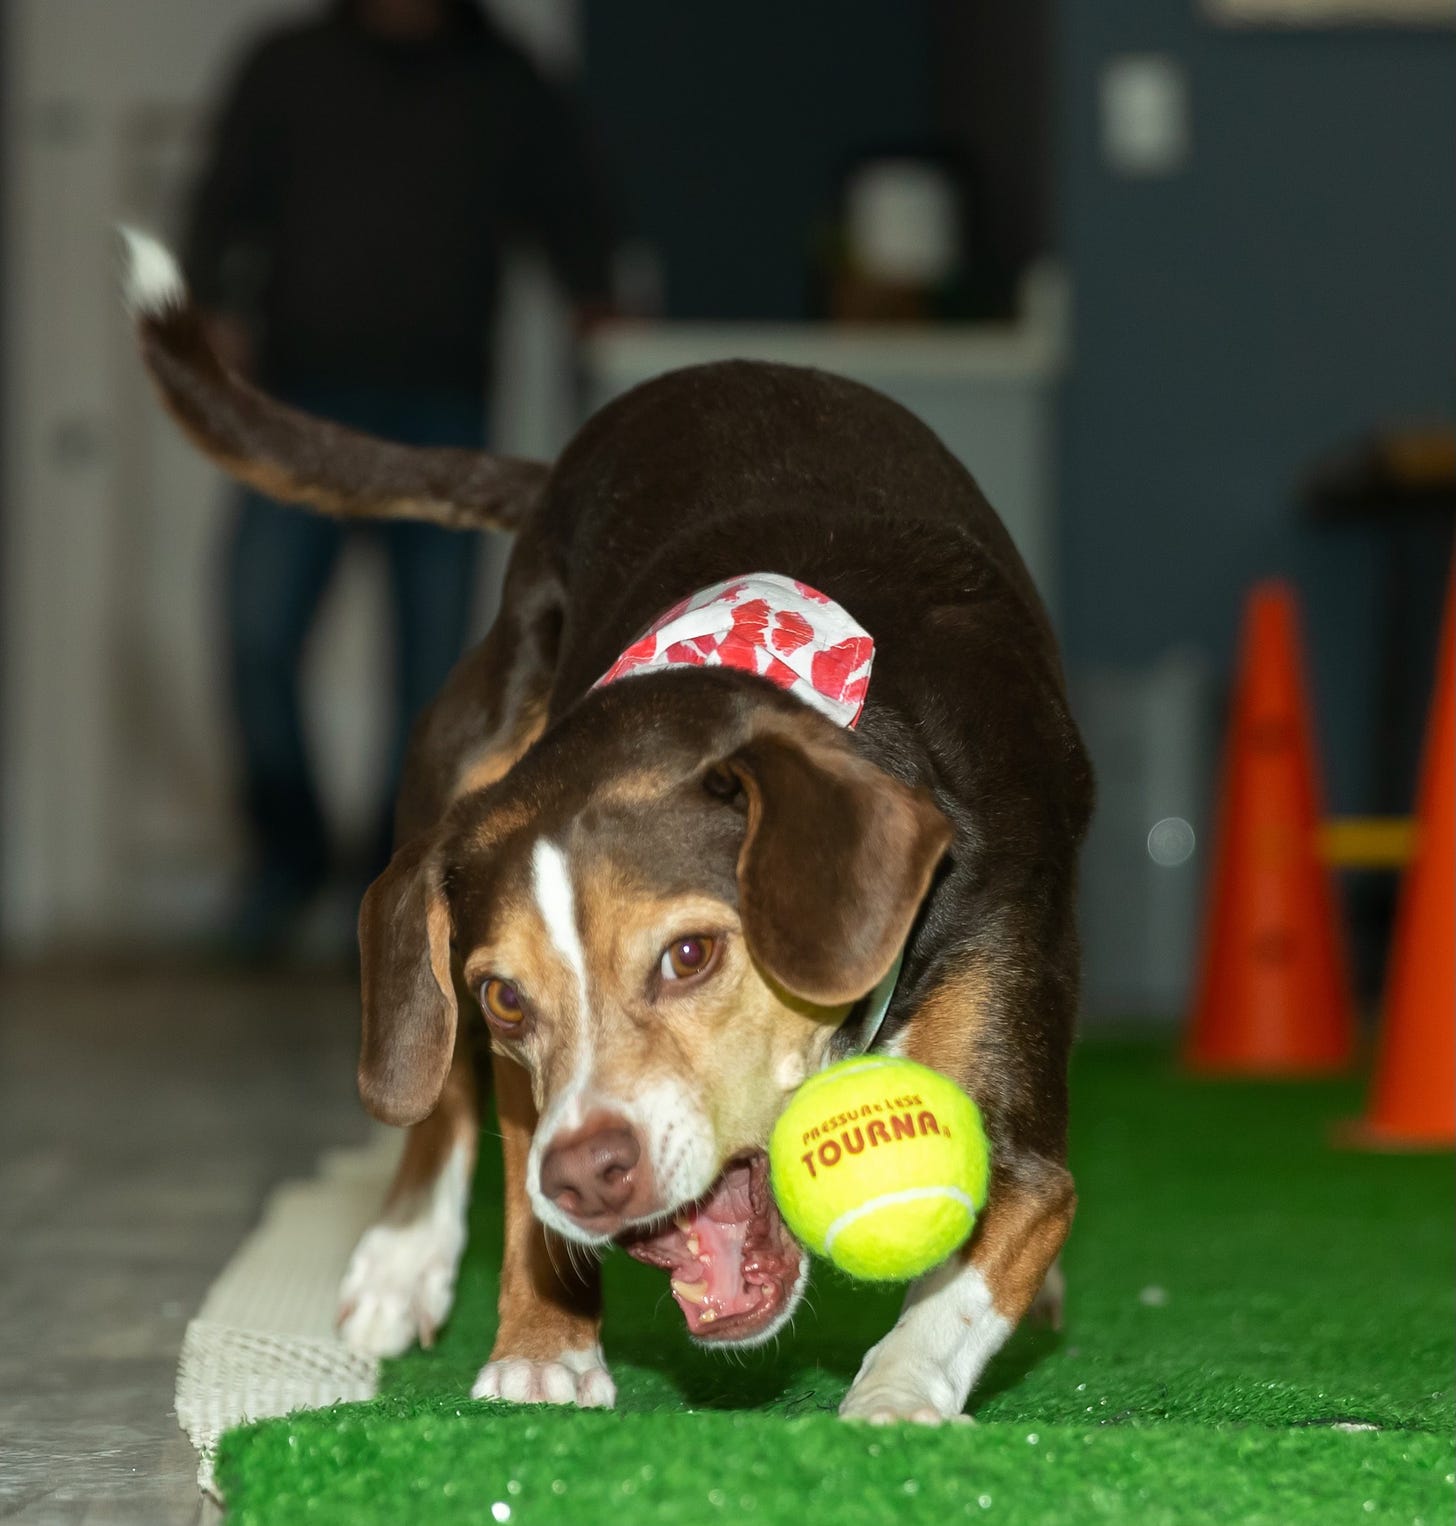 A beagle/pit bull mix playing with a tennis ball.